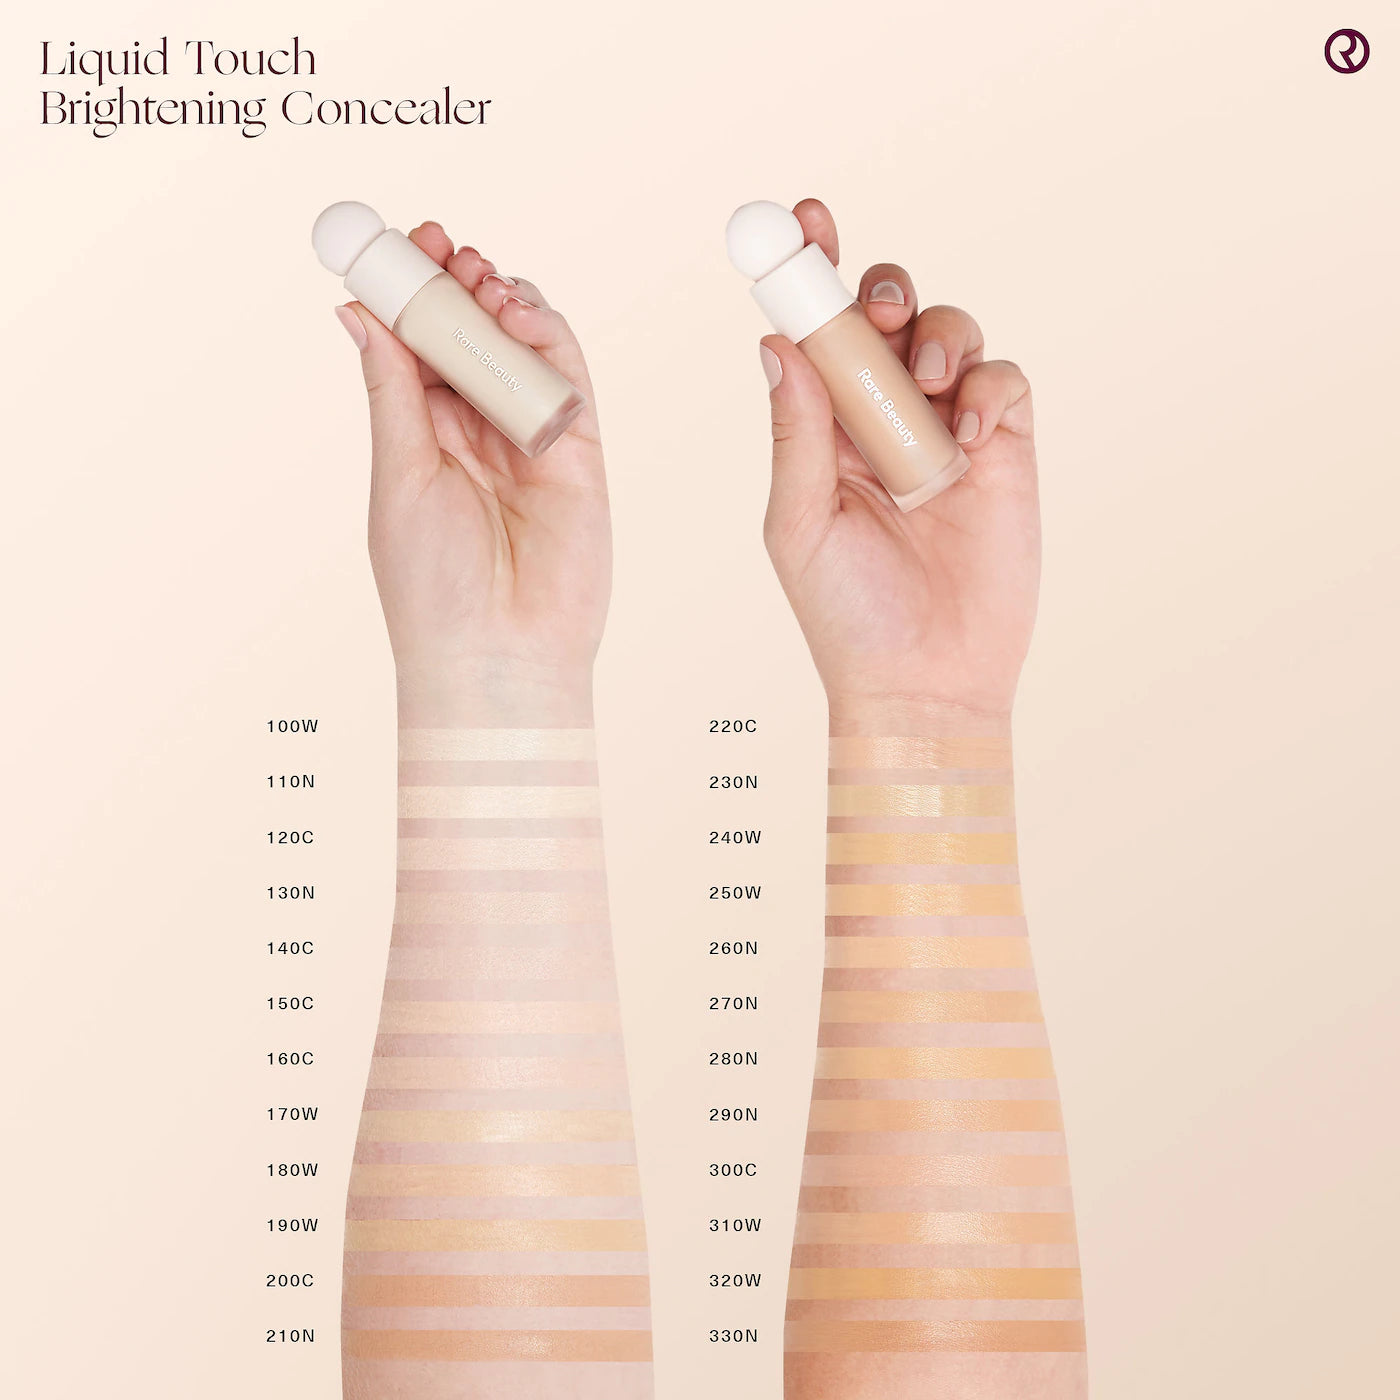 Rare Beauty Liquid Touch Brightening Concealer | 190W